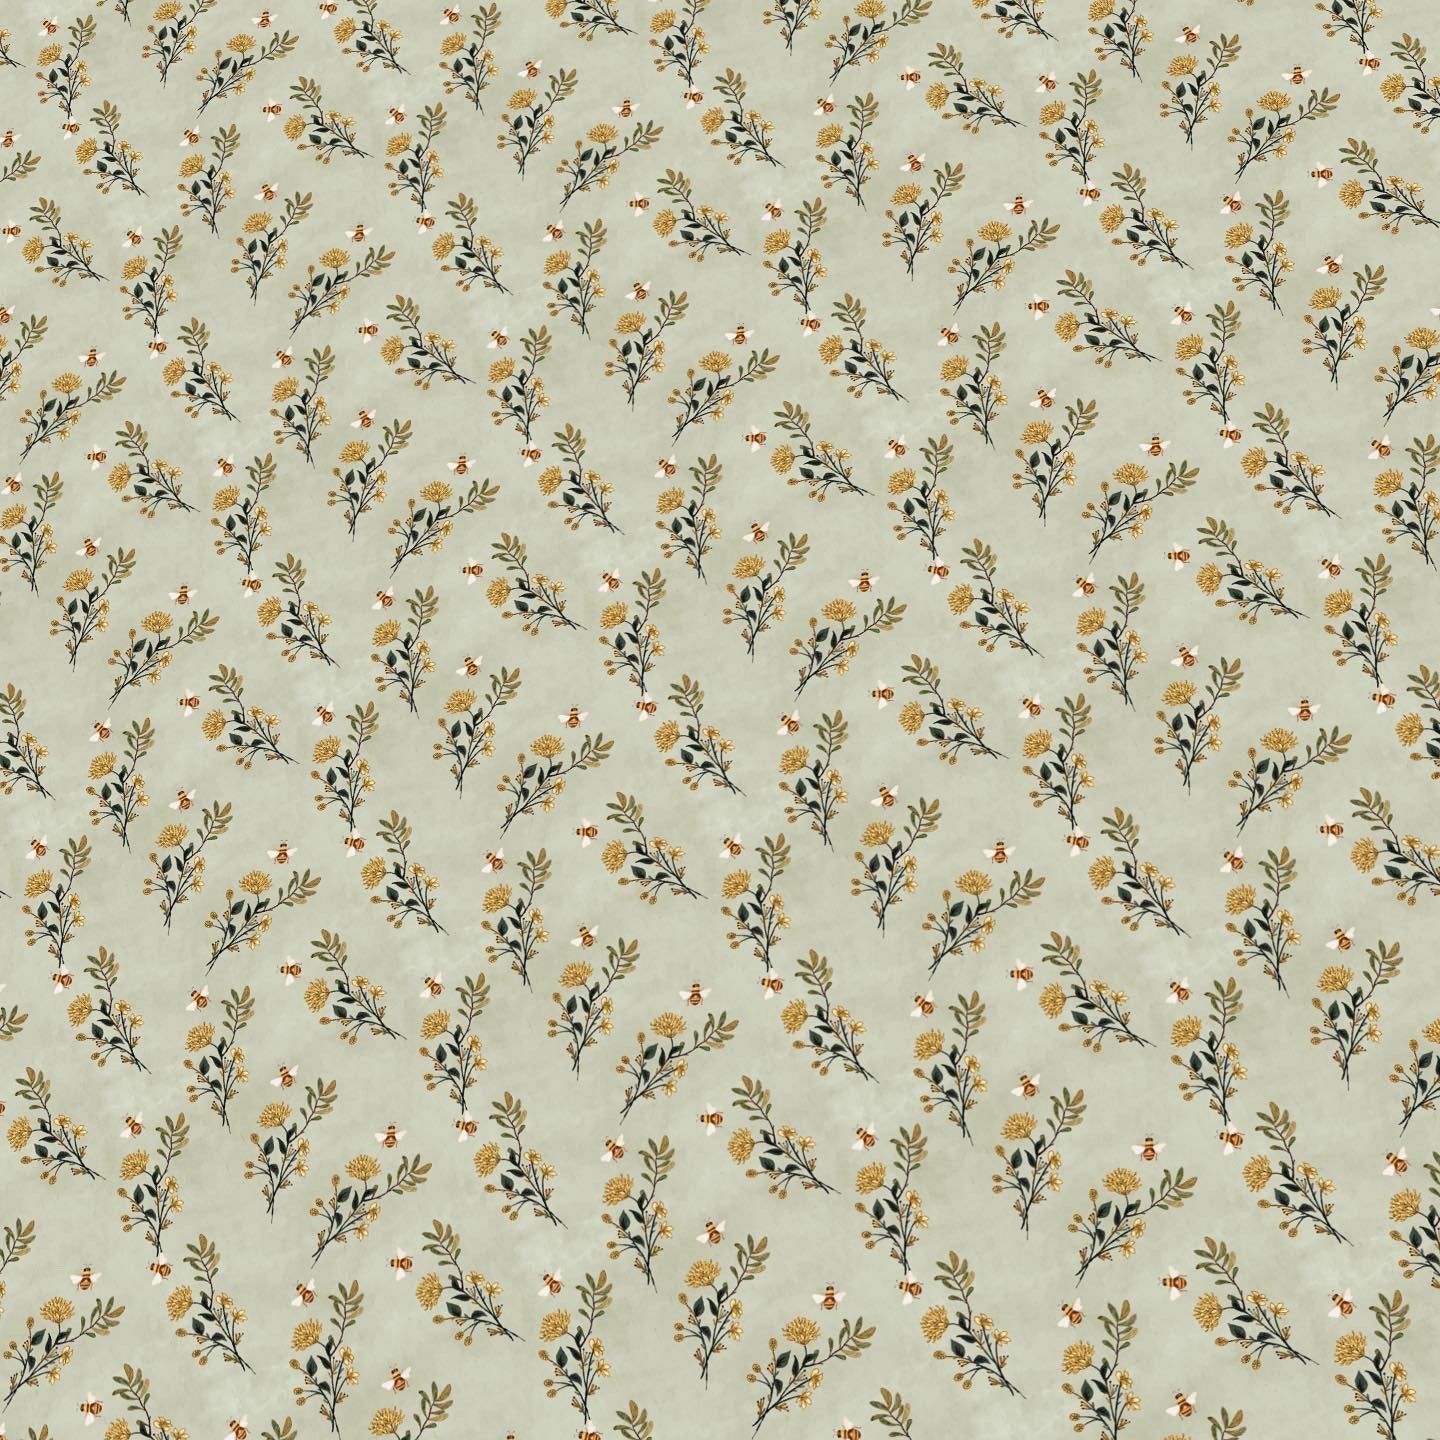 Fabric swatch of a light neutral fabric with small yellow flowers and greenery - Sage green